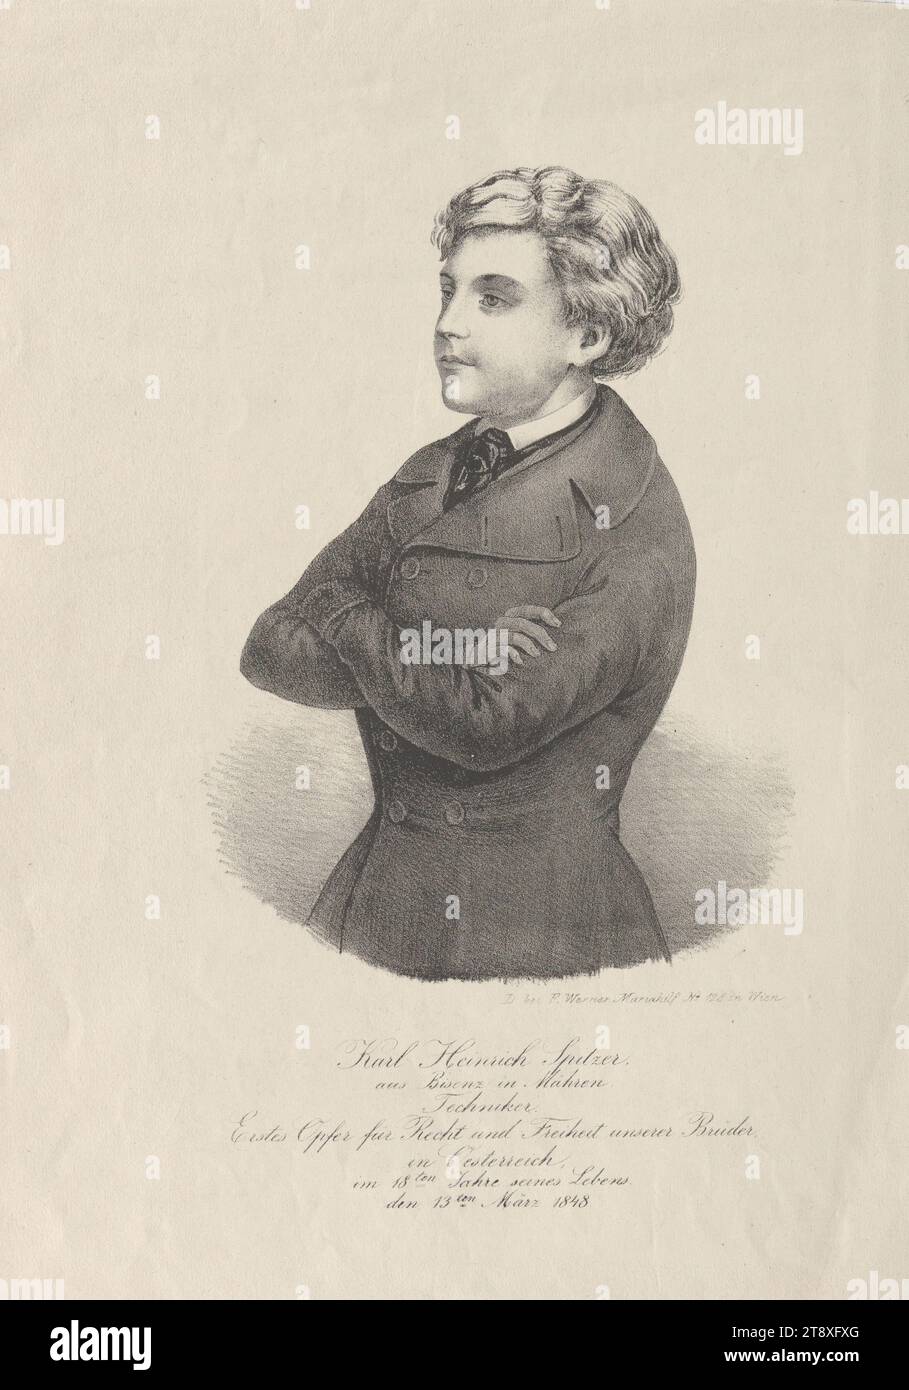 Karl Heinrich Spitzer, from Bisenz in Moravia, technician, first sacrifice for justice and freedom in Austria, in the 18th year of his life. the 13th of March 1848.', Franz Werner, publisher, 1848, paper, chalk-manner lithograph, height 37, 2 cm, width 27 cm, Fine Arts, Revolutions of 1848, 1849, portrait, man, The Vienna Collection Stock Photo